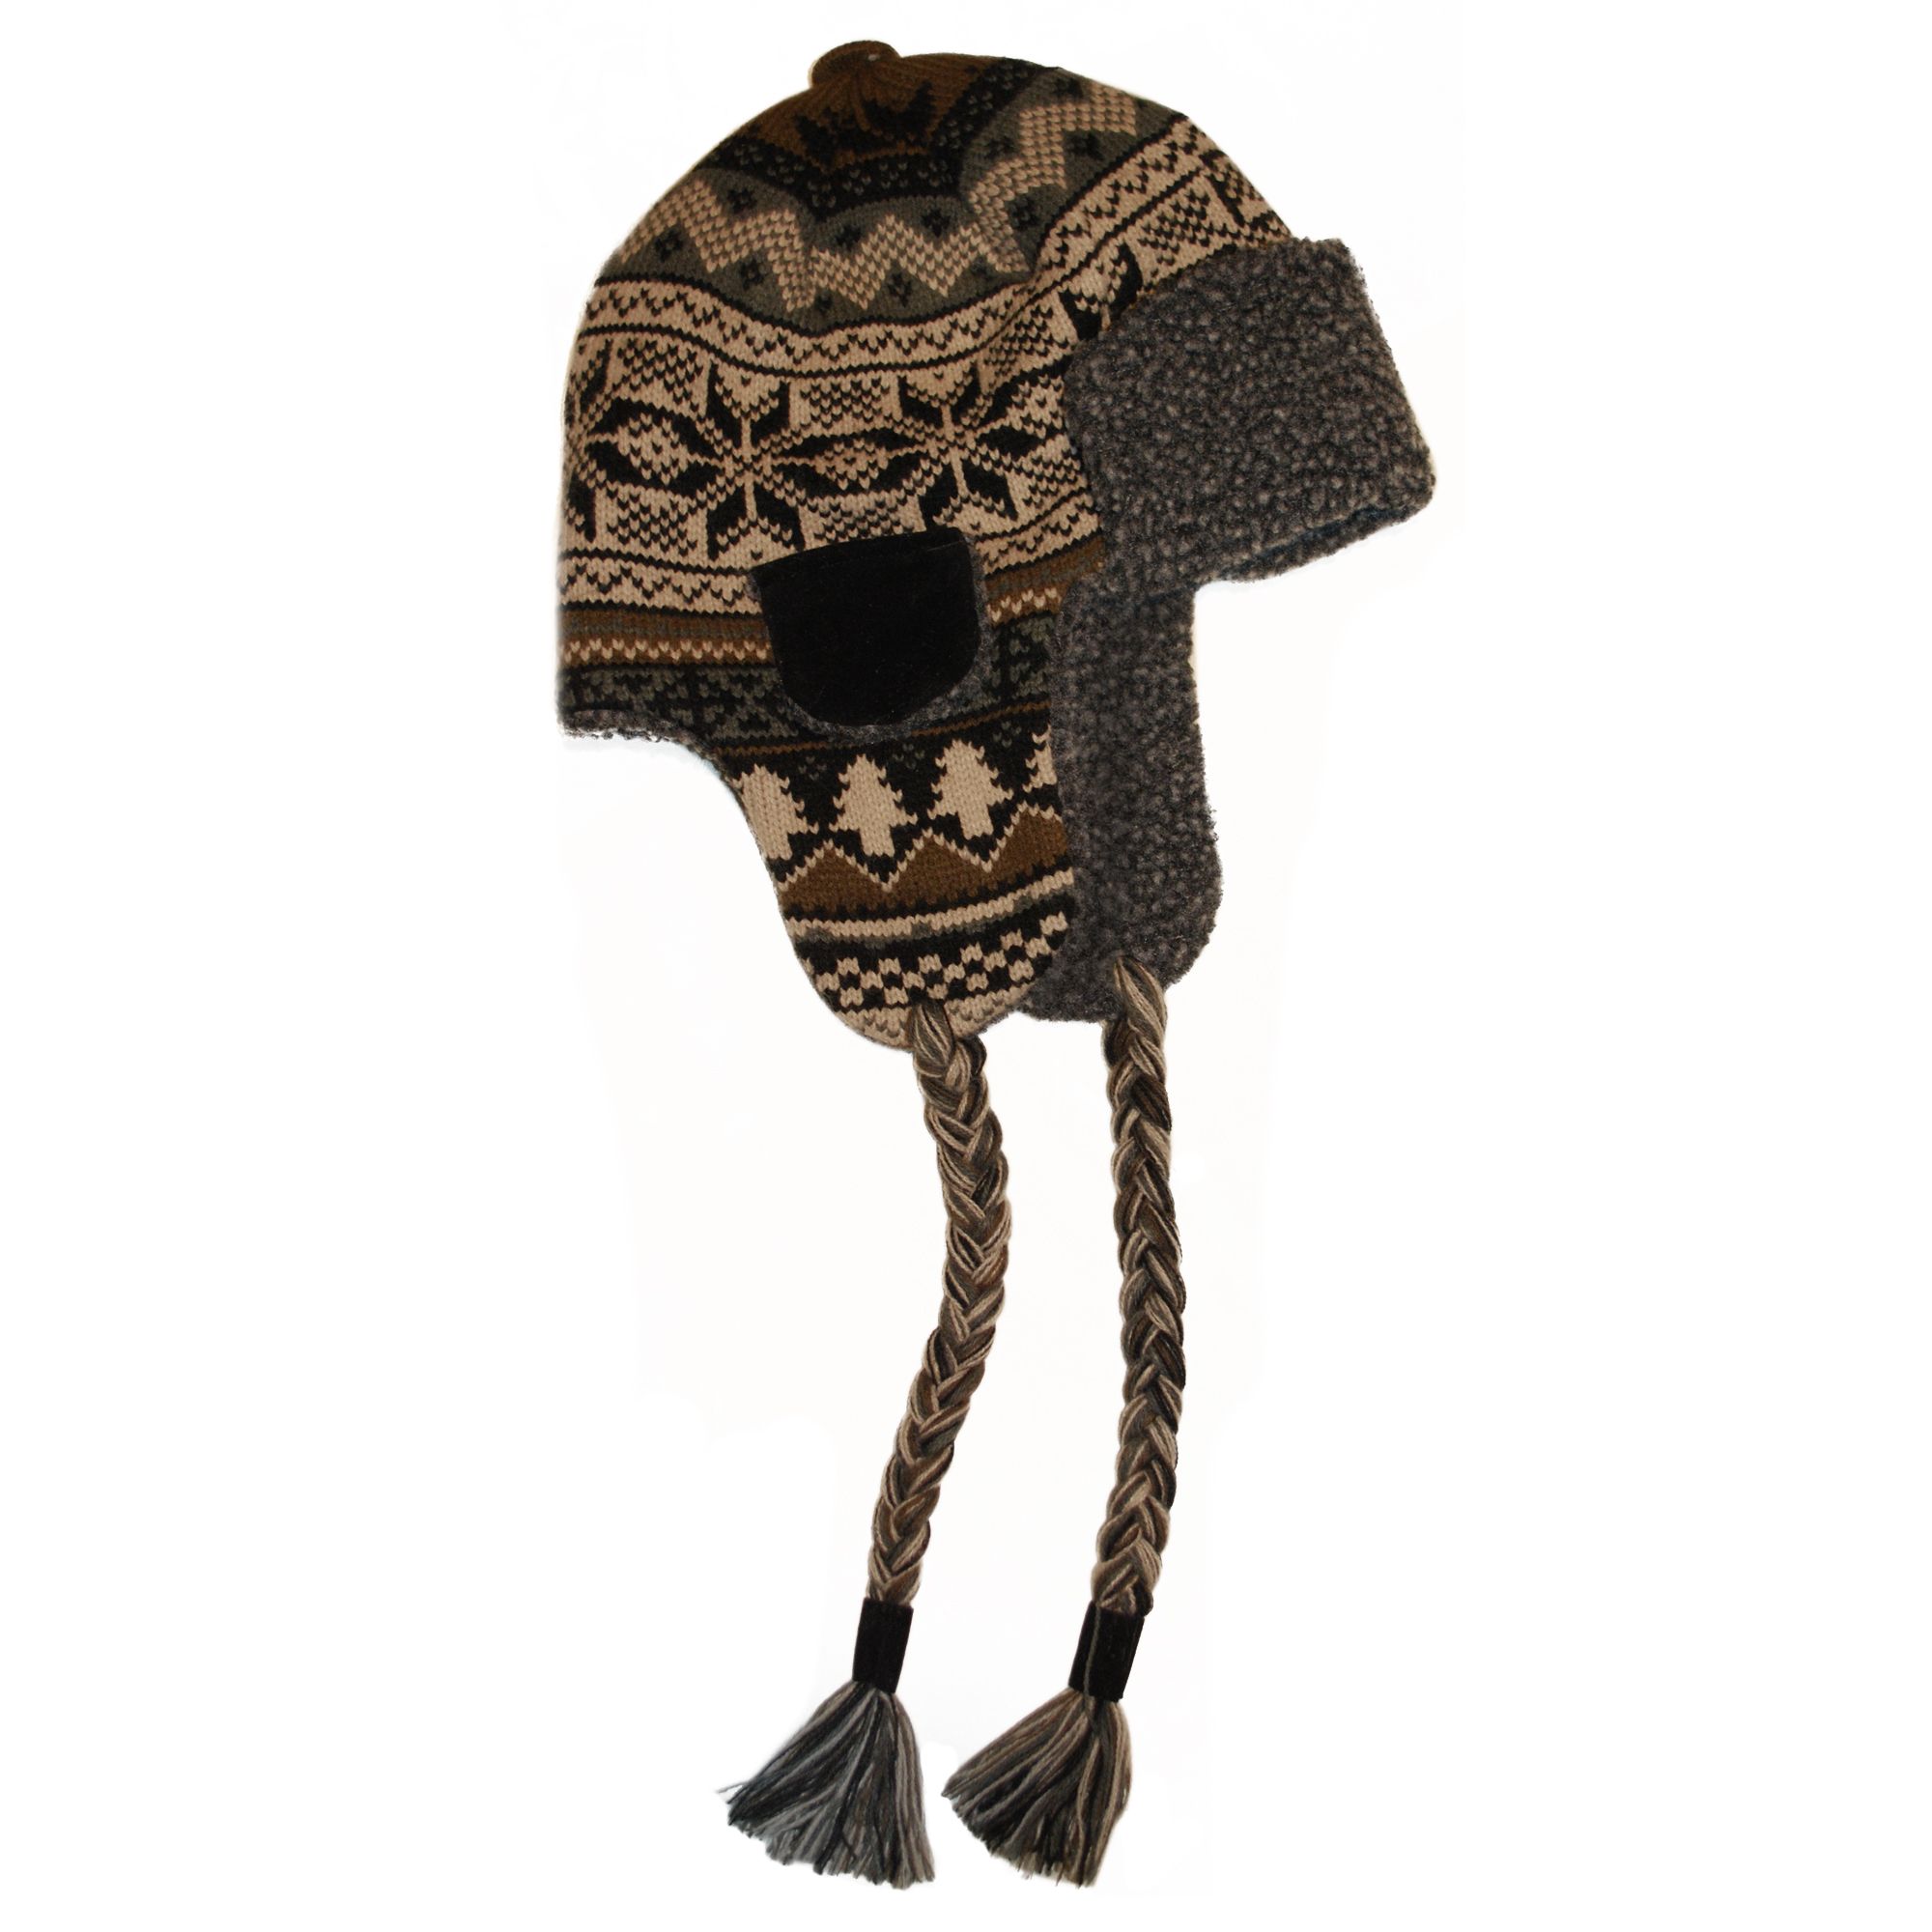 Traditional Nordic Knit Button Top Trapper Hat with Sherpa Lining - Neutral